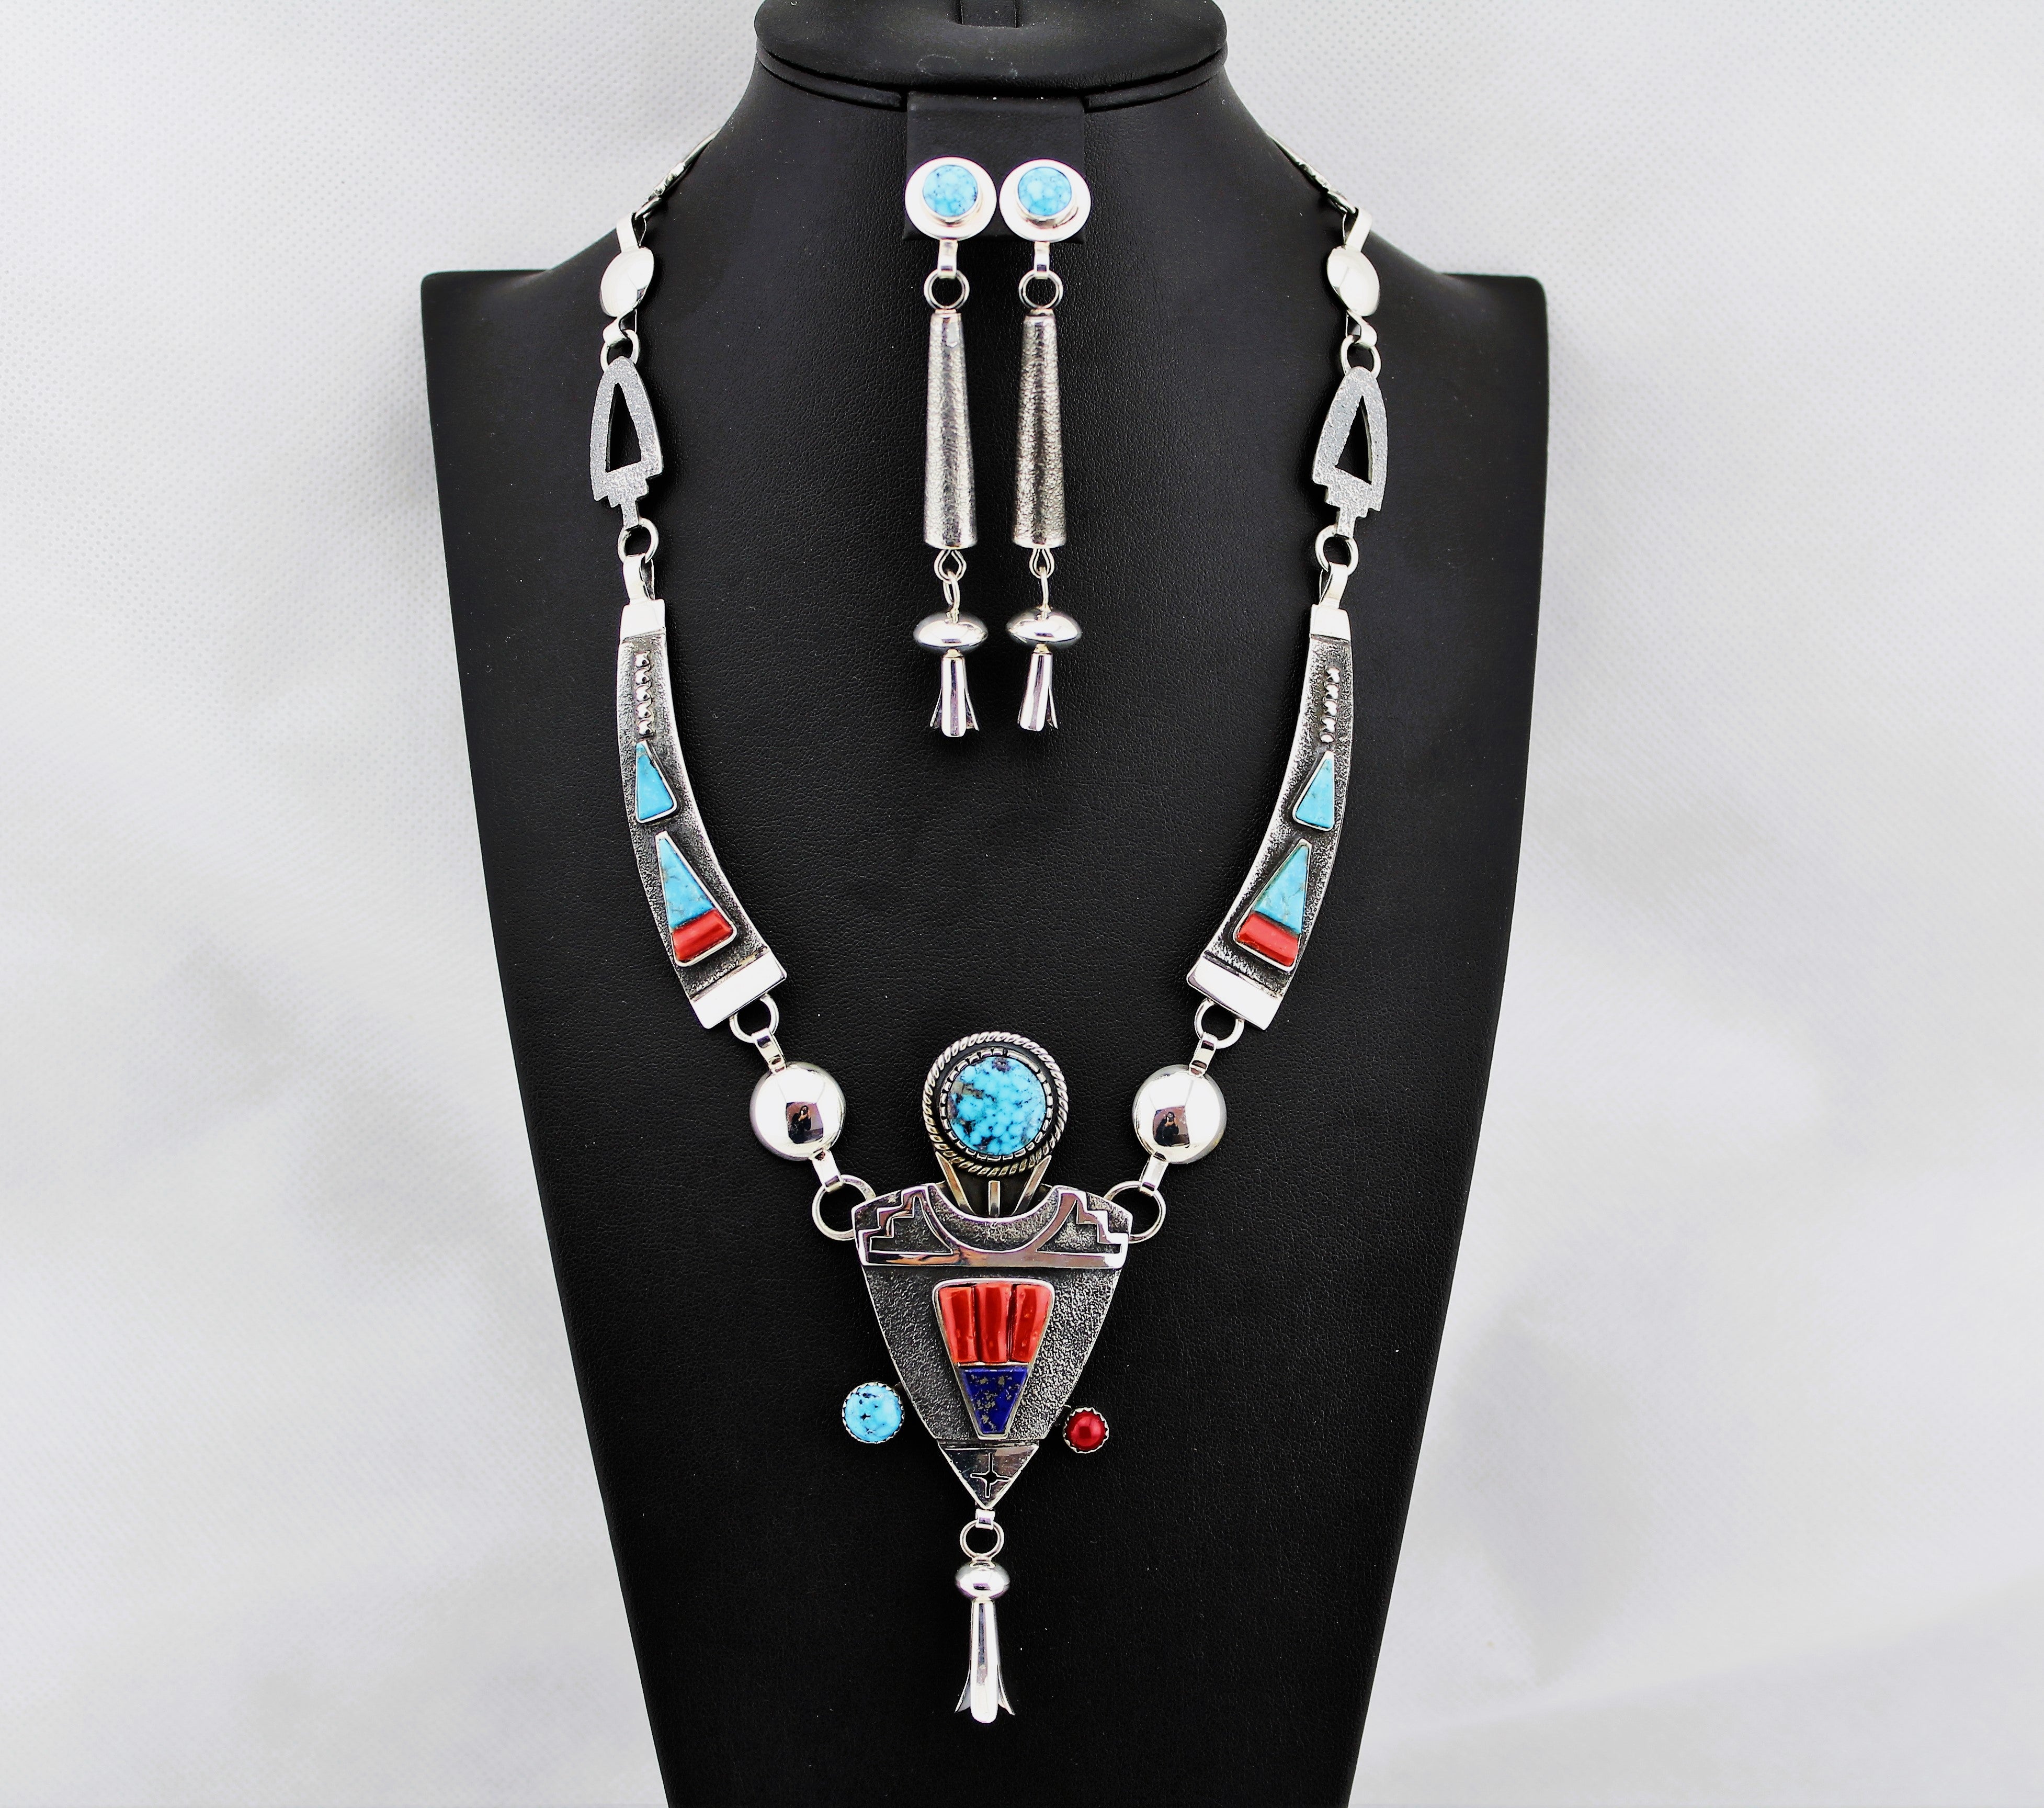 Jack Tom Sterling Necklace and Earrings Set